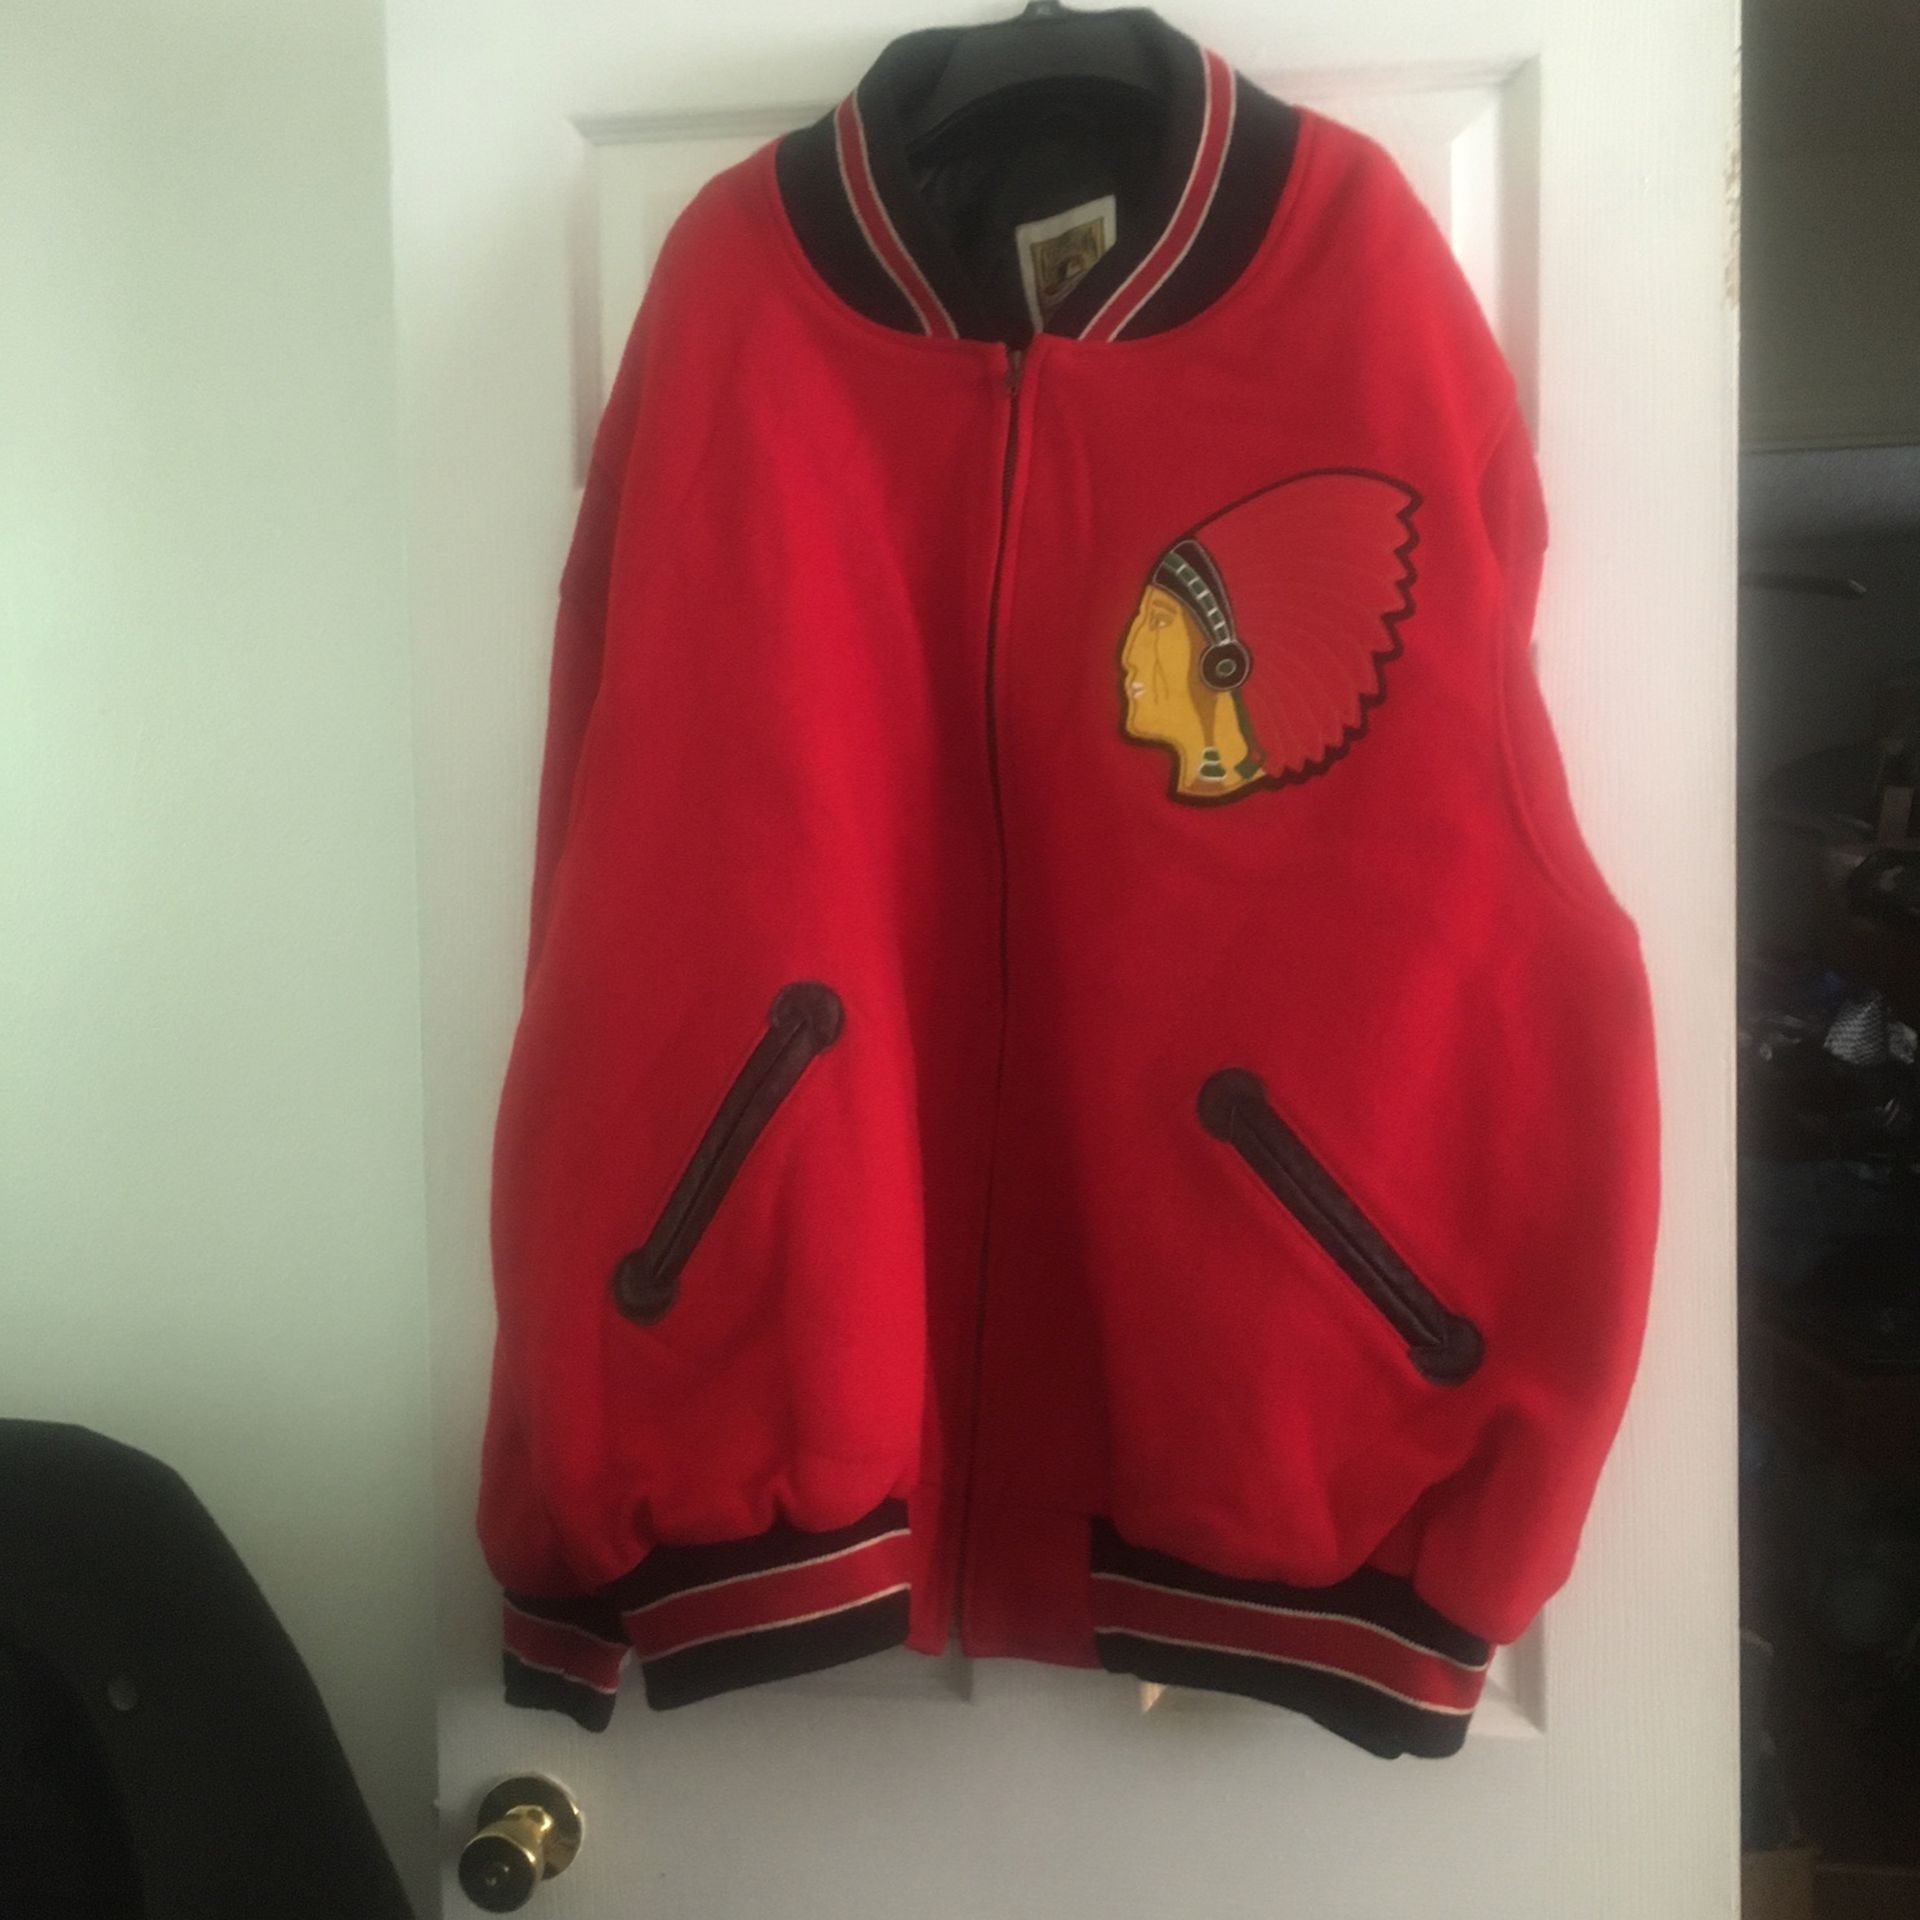 Braves Jacket Size 64 for Sale in Macon, GA - OfferUp